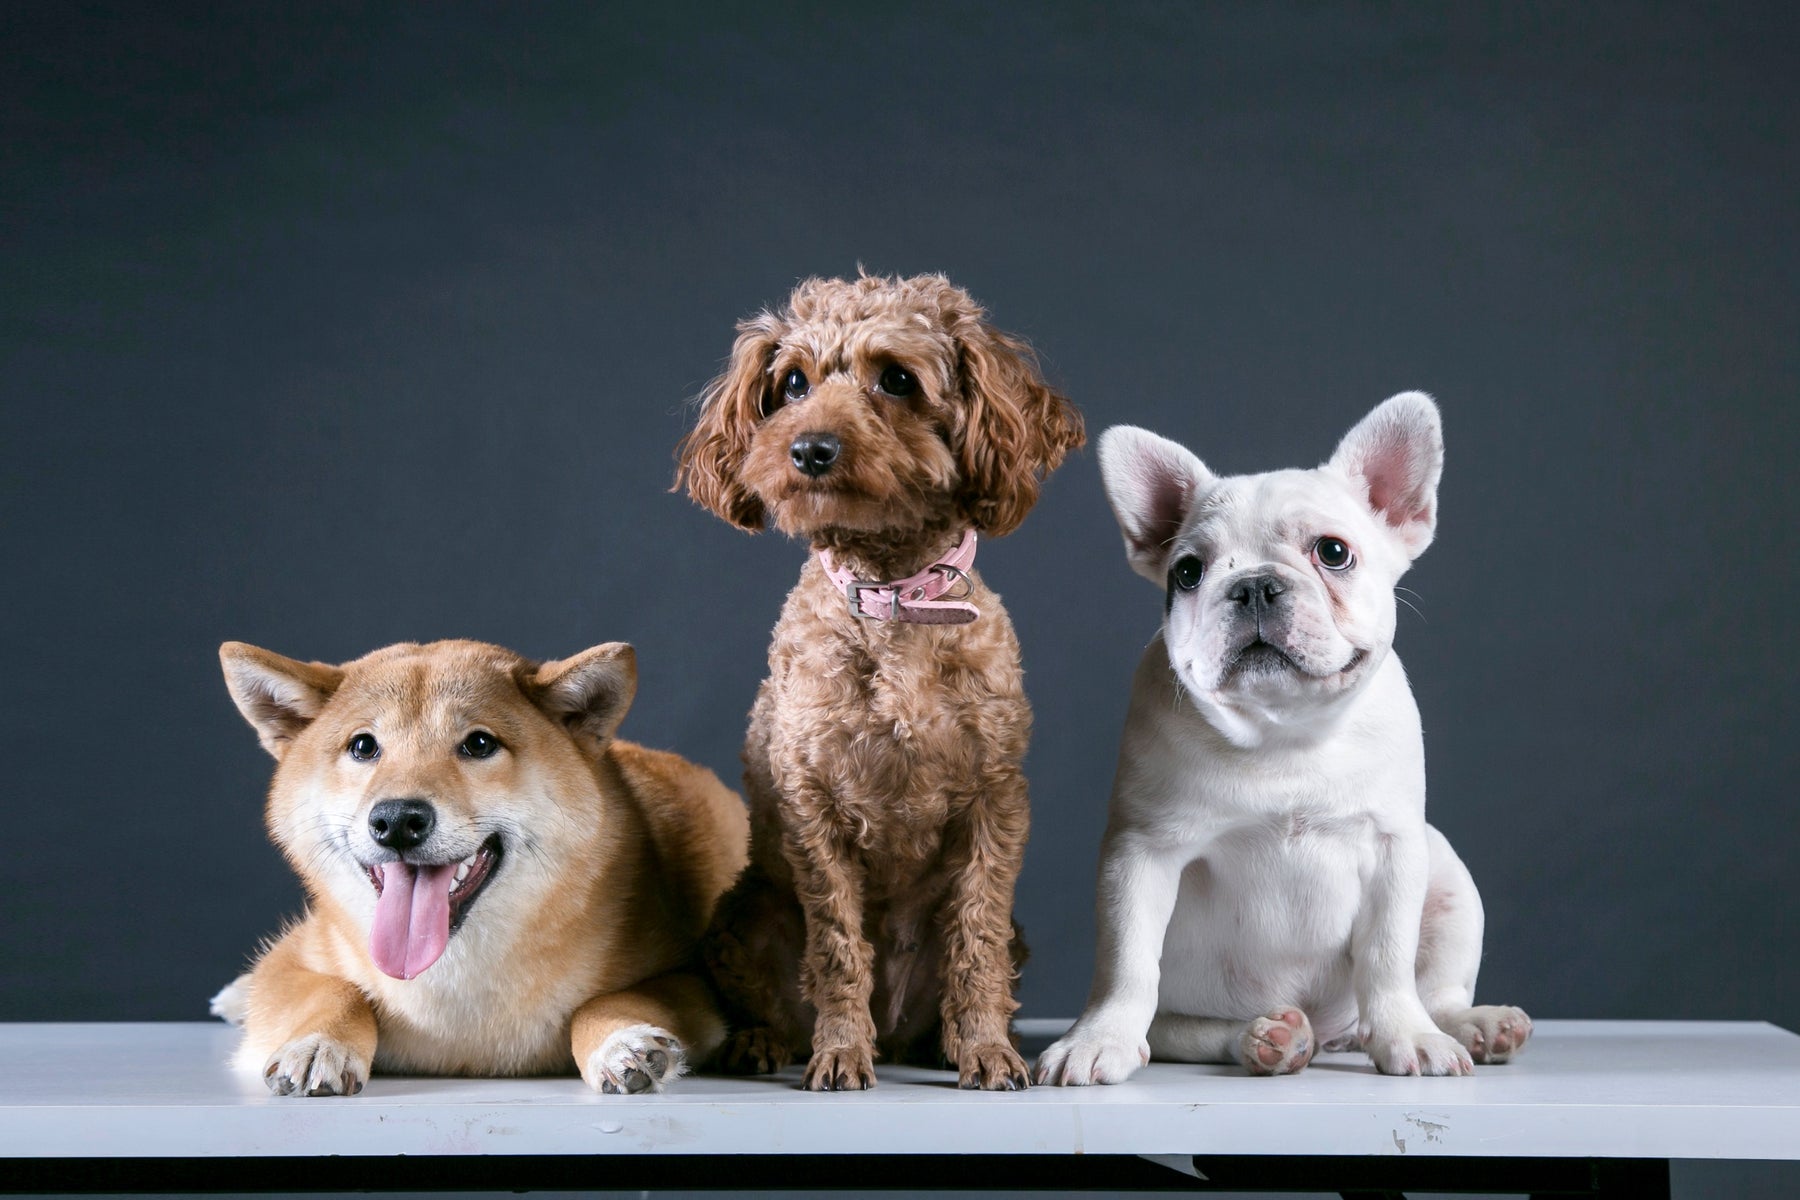 THE 5 DOG BREEDS YOU’RE GOING TO SPEND THE MOST MONEY ON